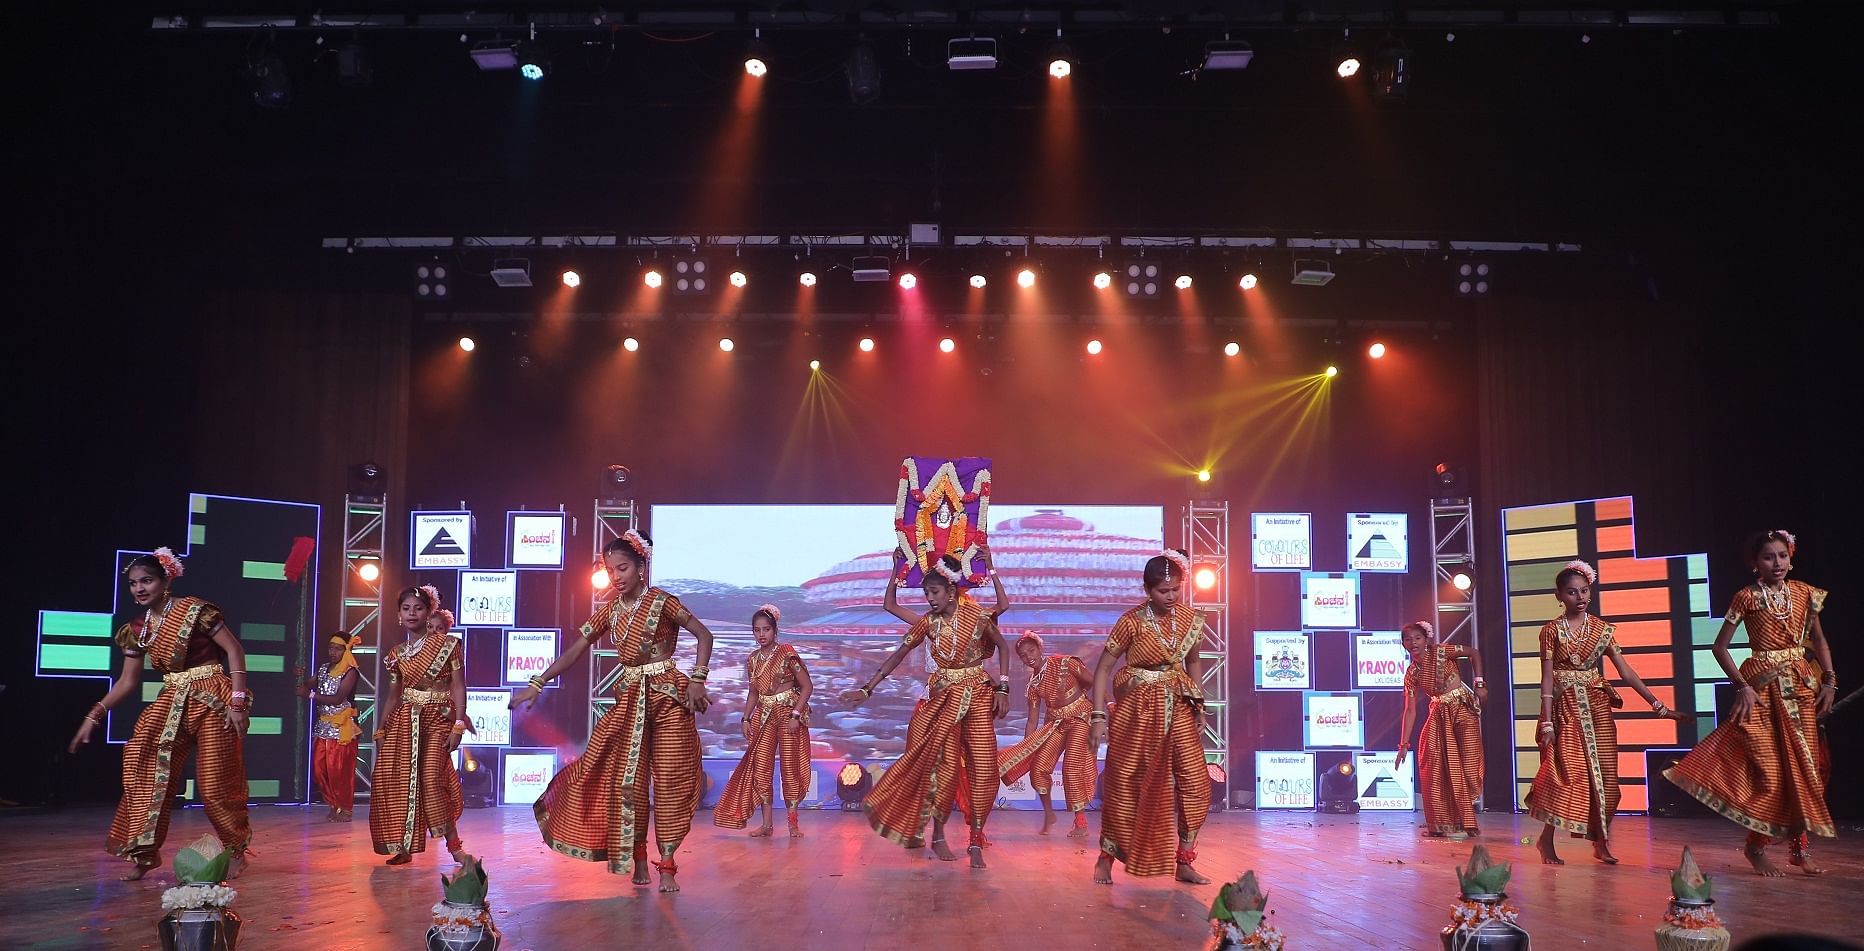 (Above and below) Dance performances by the children who took part in ‘Sinchana’.